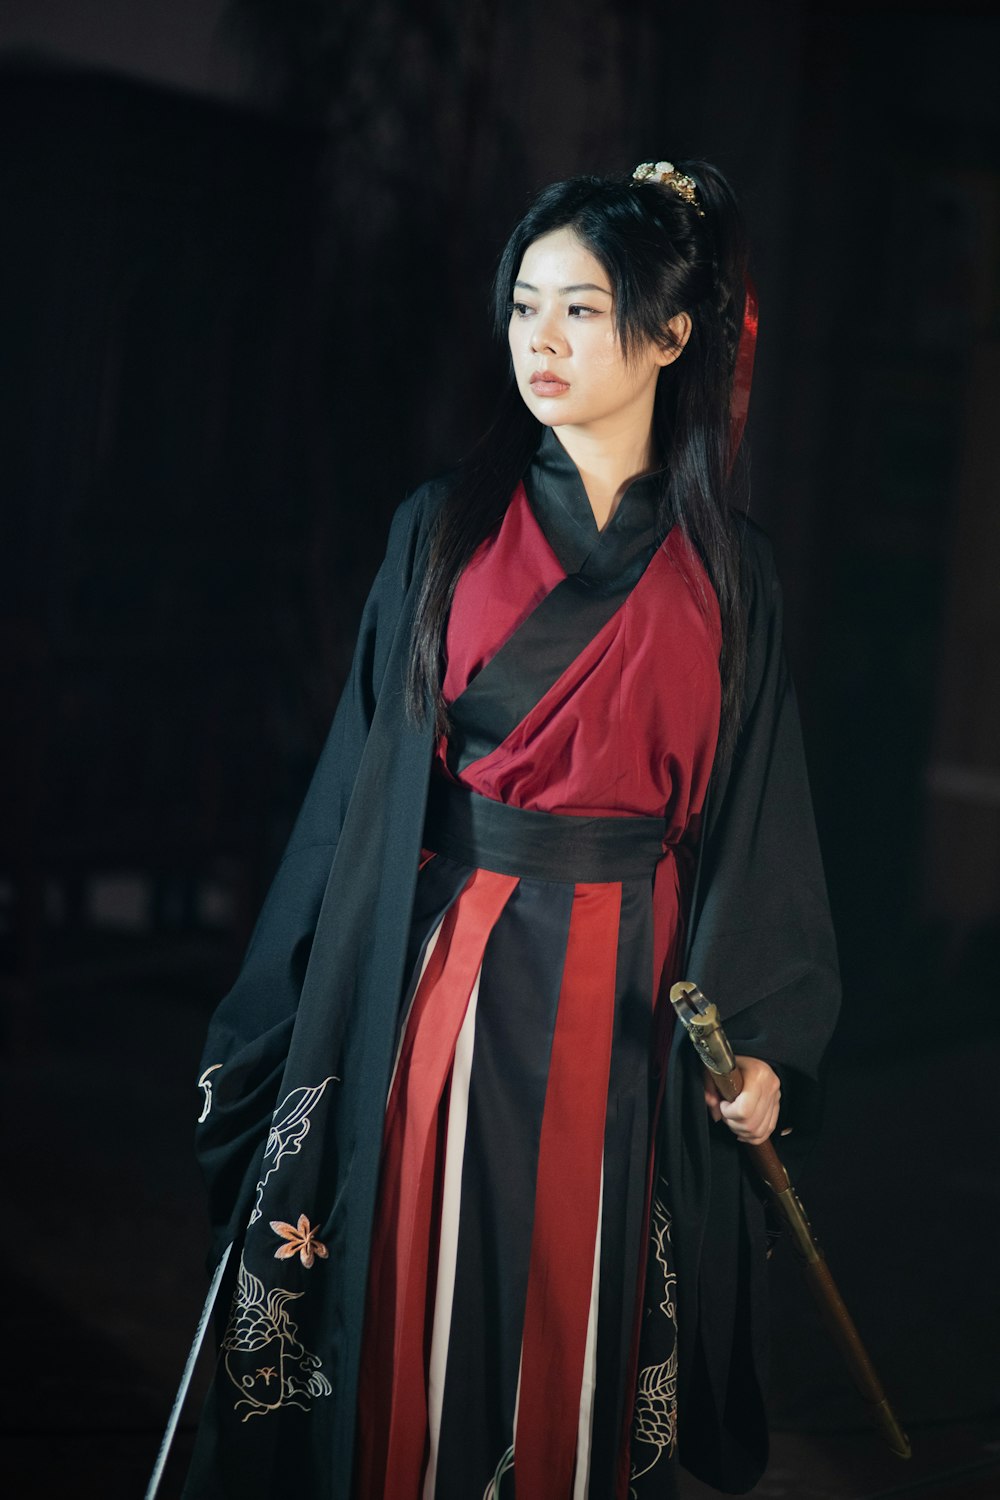 a woman in a black and red dress holding a sword